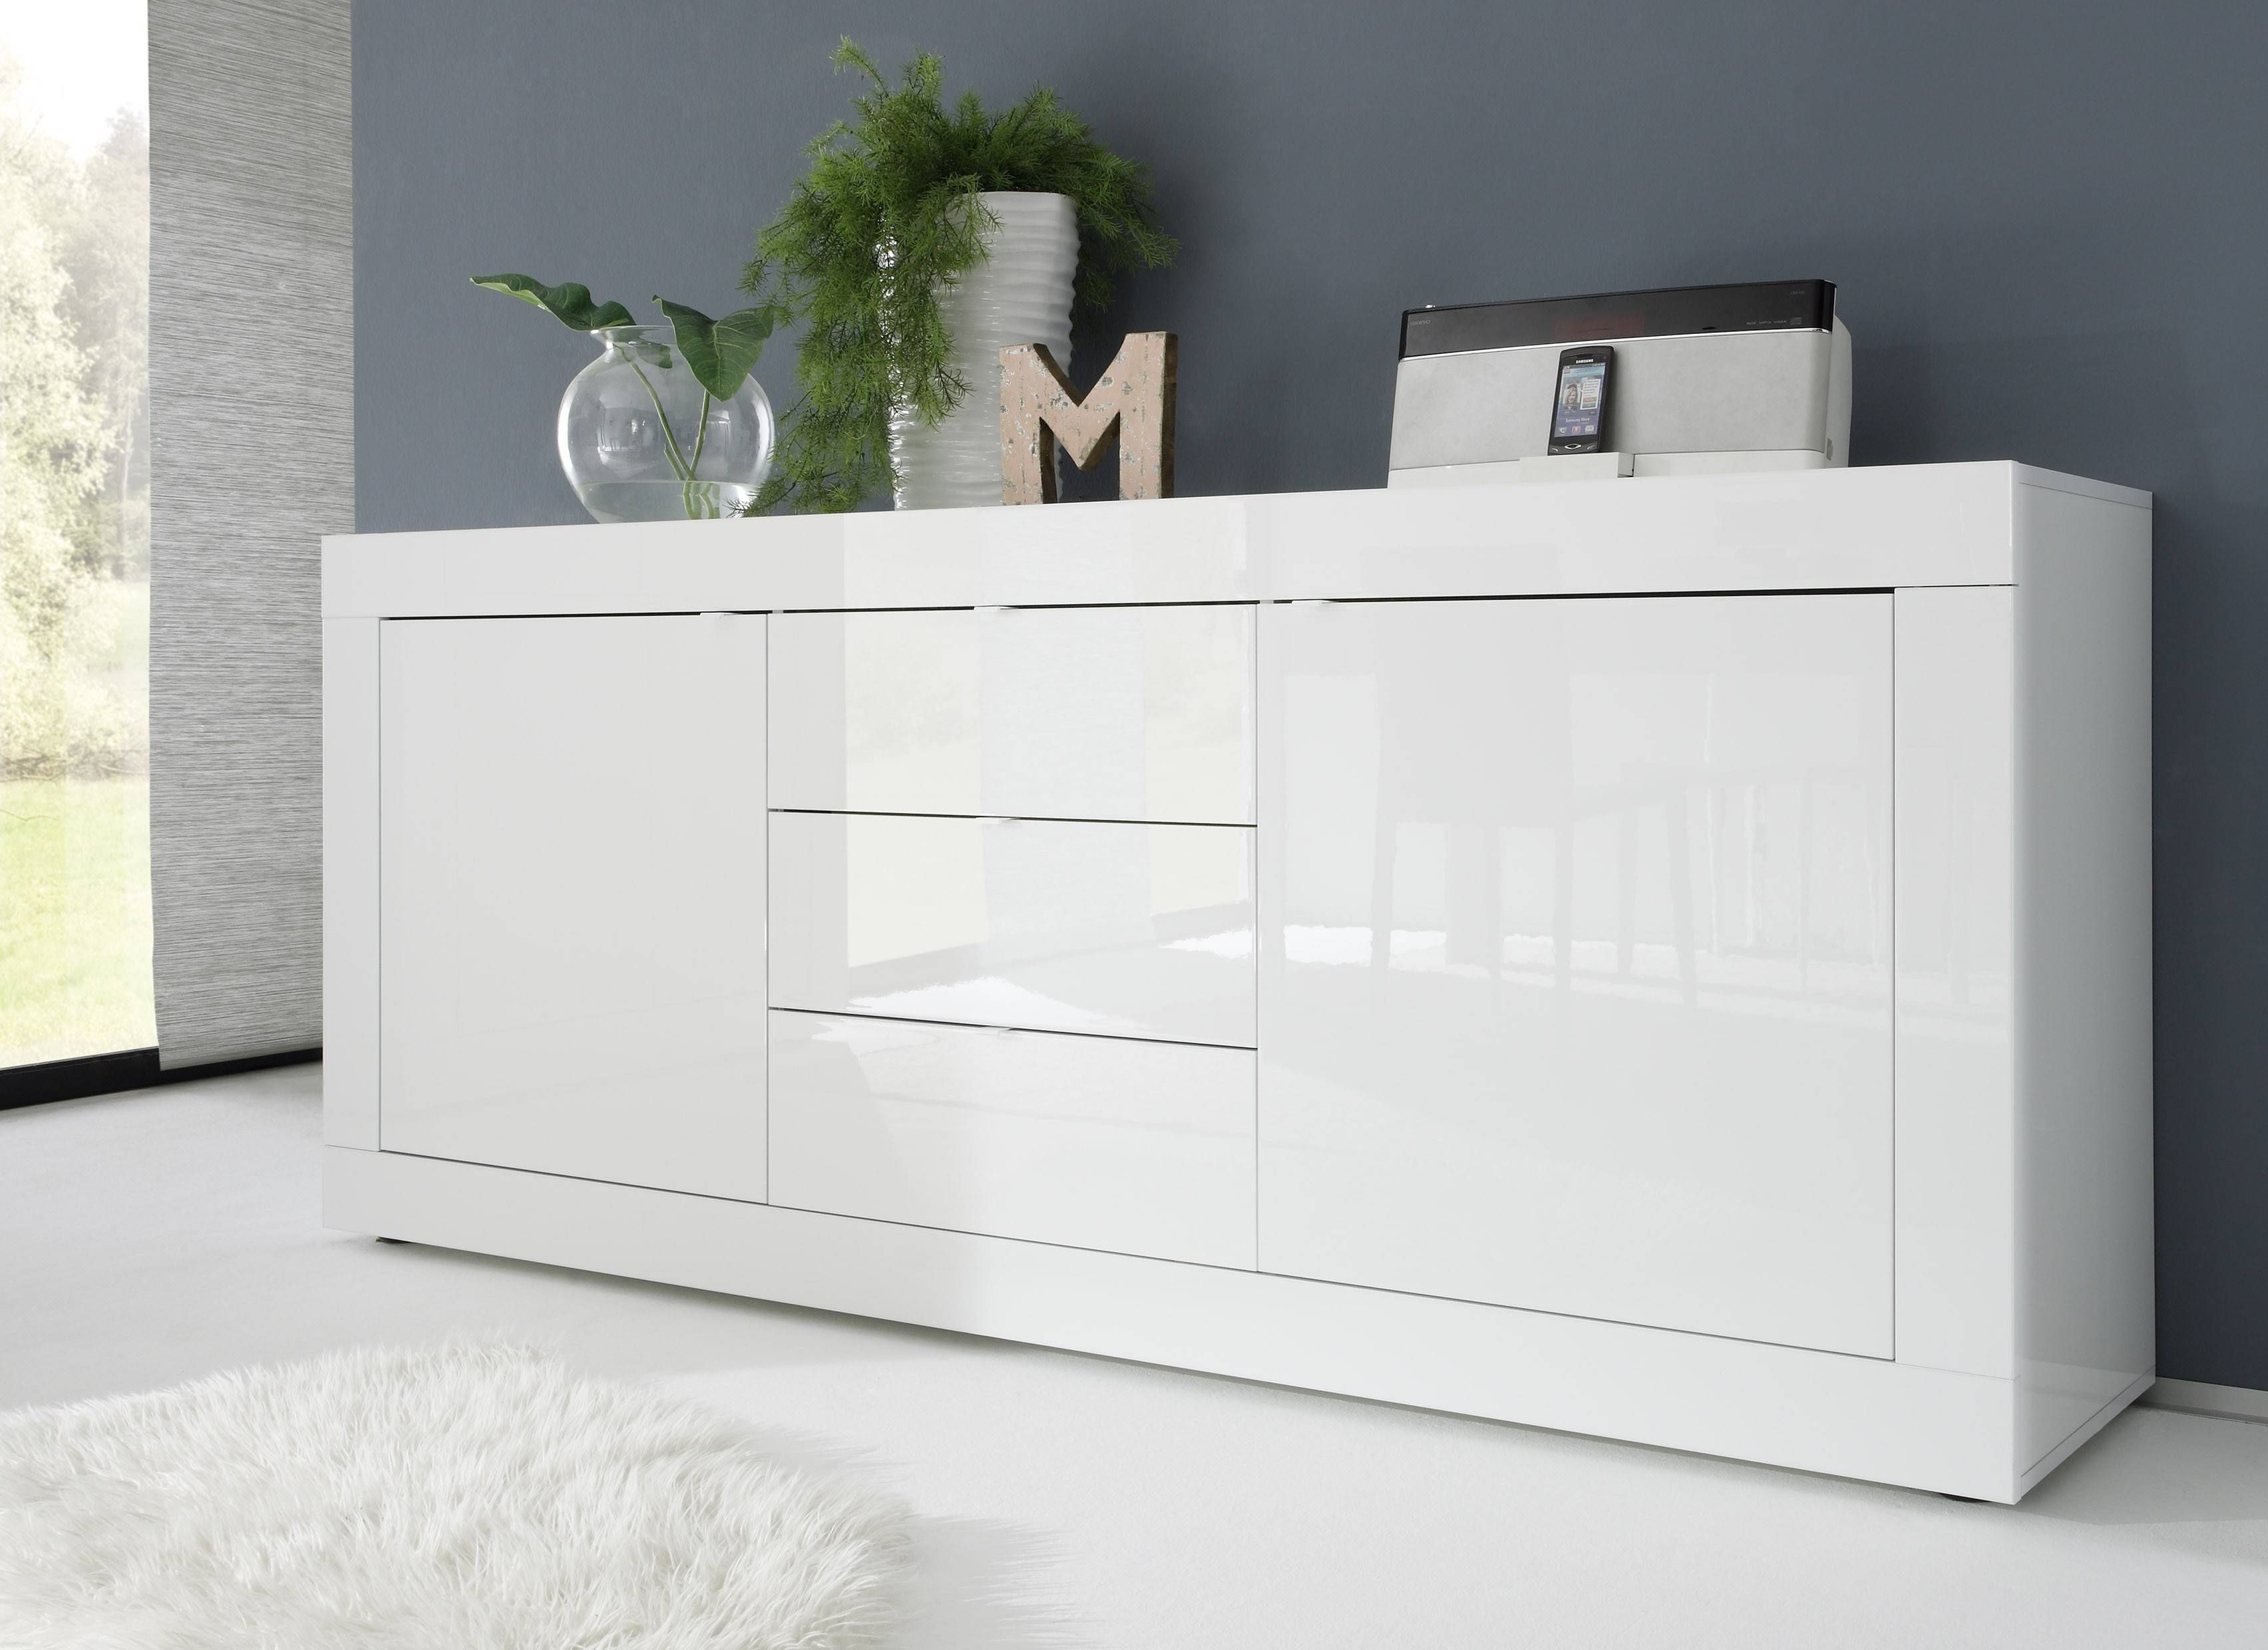 Best Of White Buffet Sideboard – Bjdgjy For Most Recent White Buffet Sideboards (View 7 of 15)